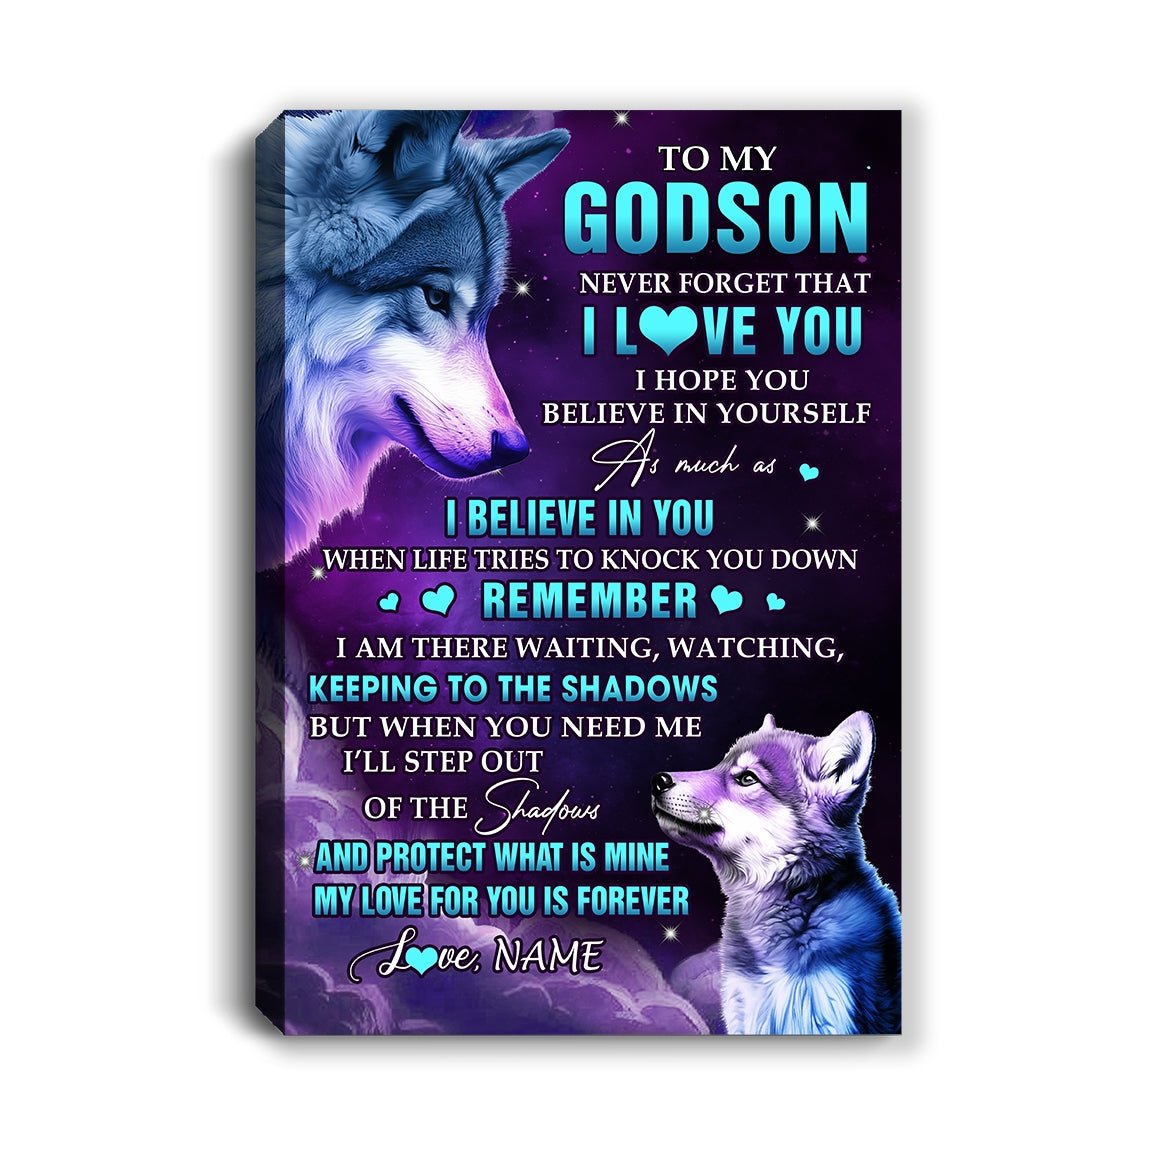 Personalized_To_My_Godson_Canvas_From_Godmother_Godfather_Wolf_Moon_My_Love_For_You_Is_Forever_Godson_Birthday_Gifts_Christmas_Custom_Wall_Art_Print_Framed_Canvas_Canvas_mockup_1.jpg